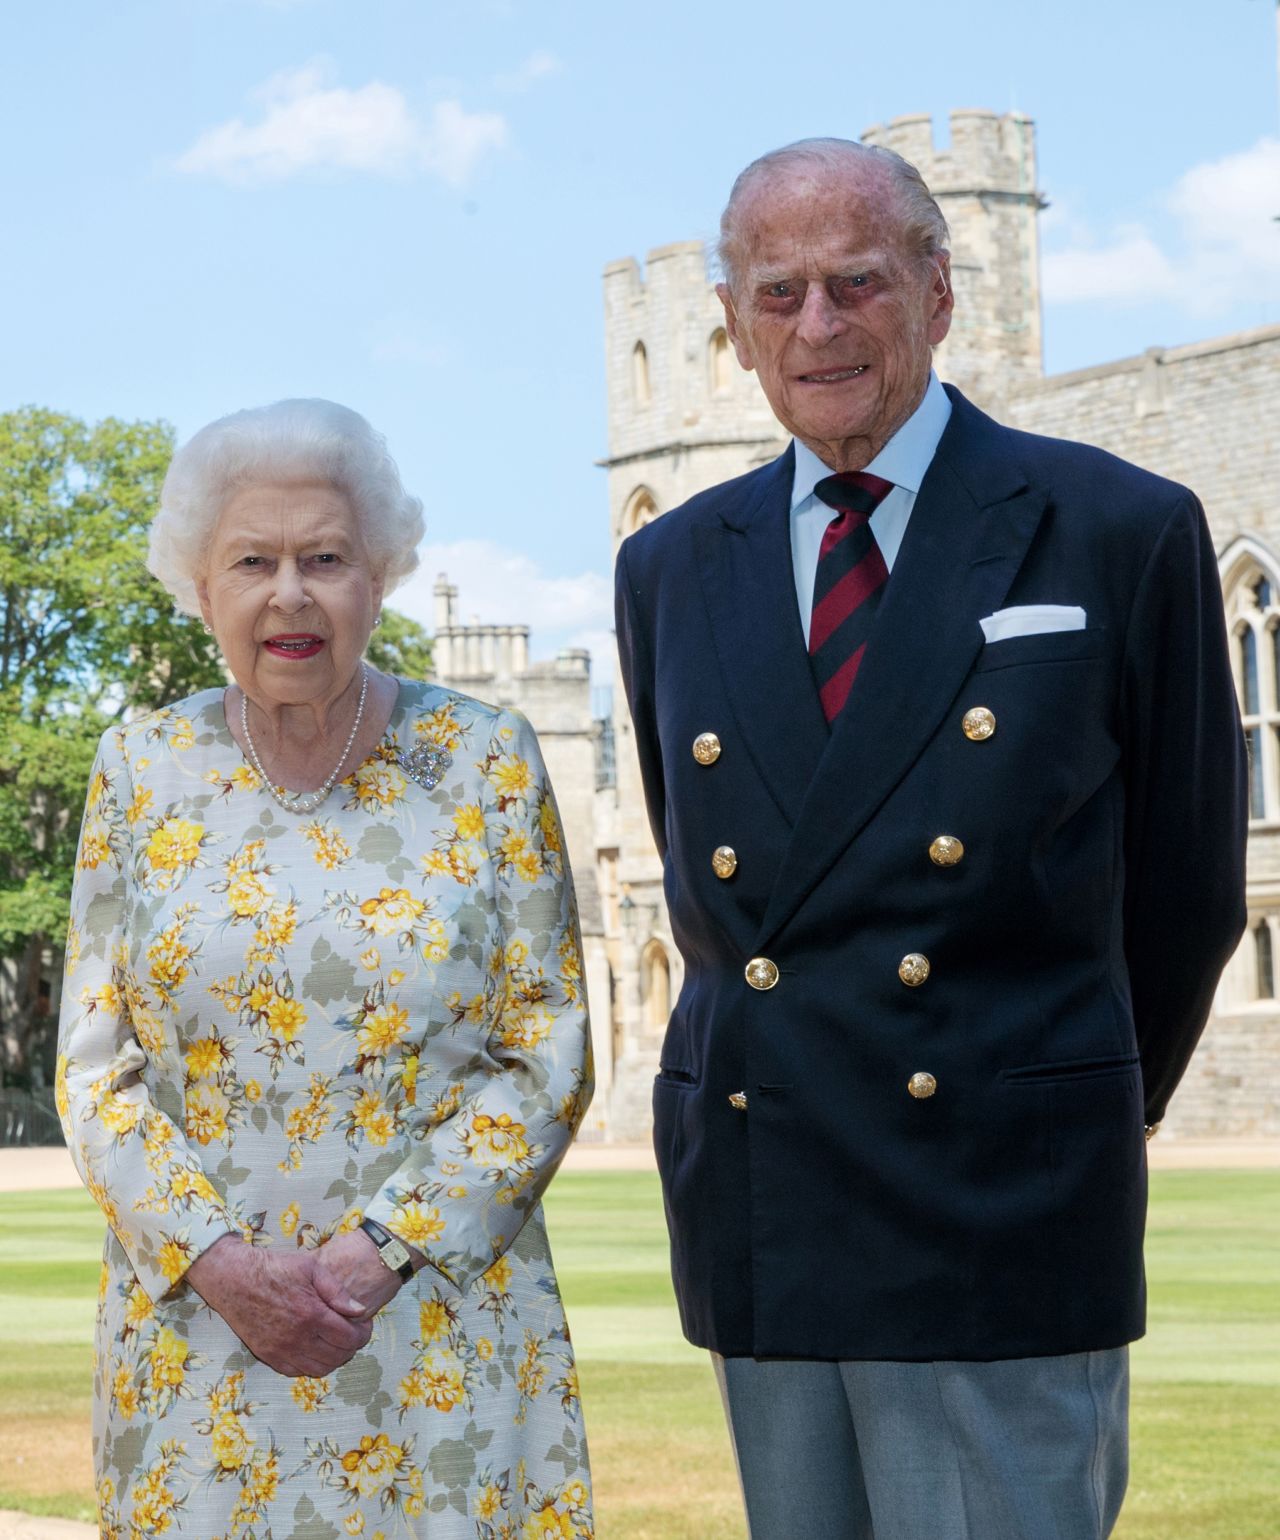 The Queen and Prince Philip pose for a photo in June 2020, ahead of Philip's 99th birthday.